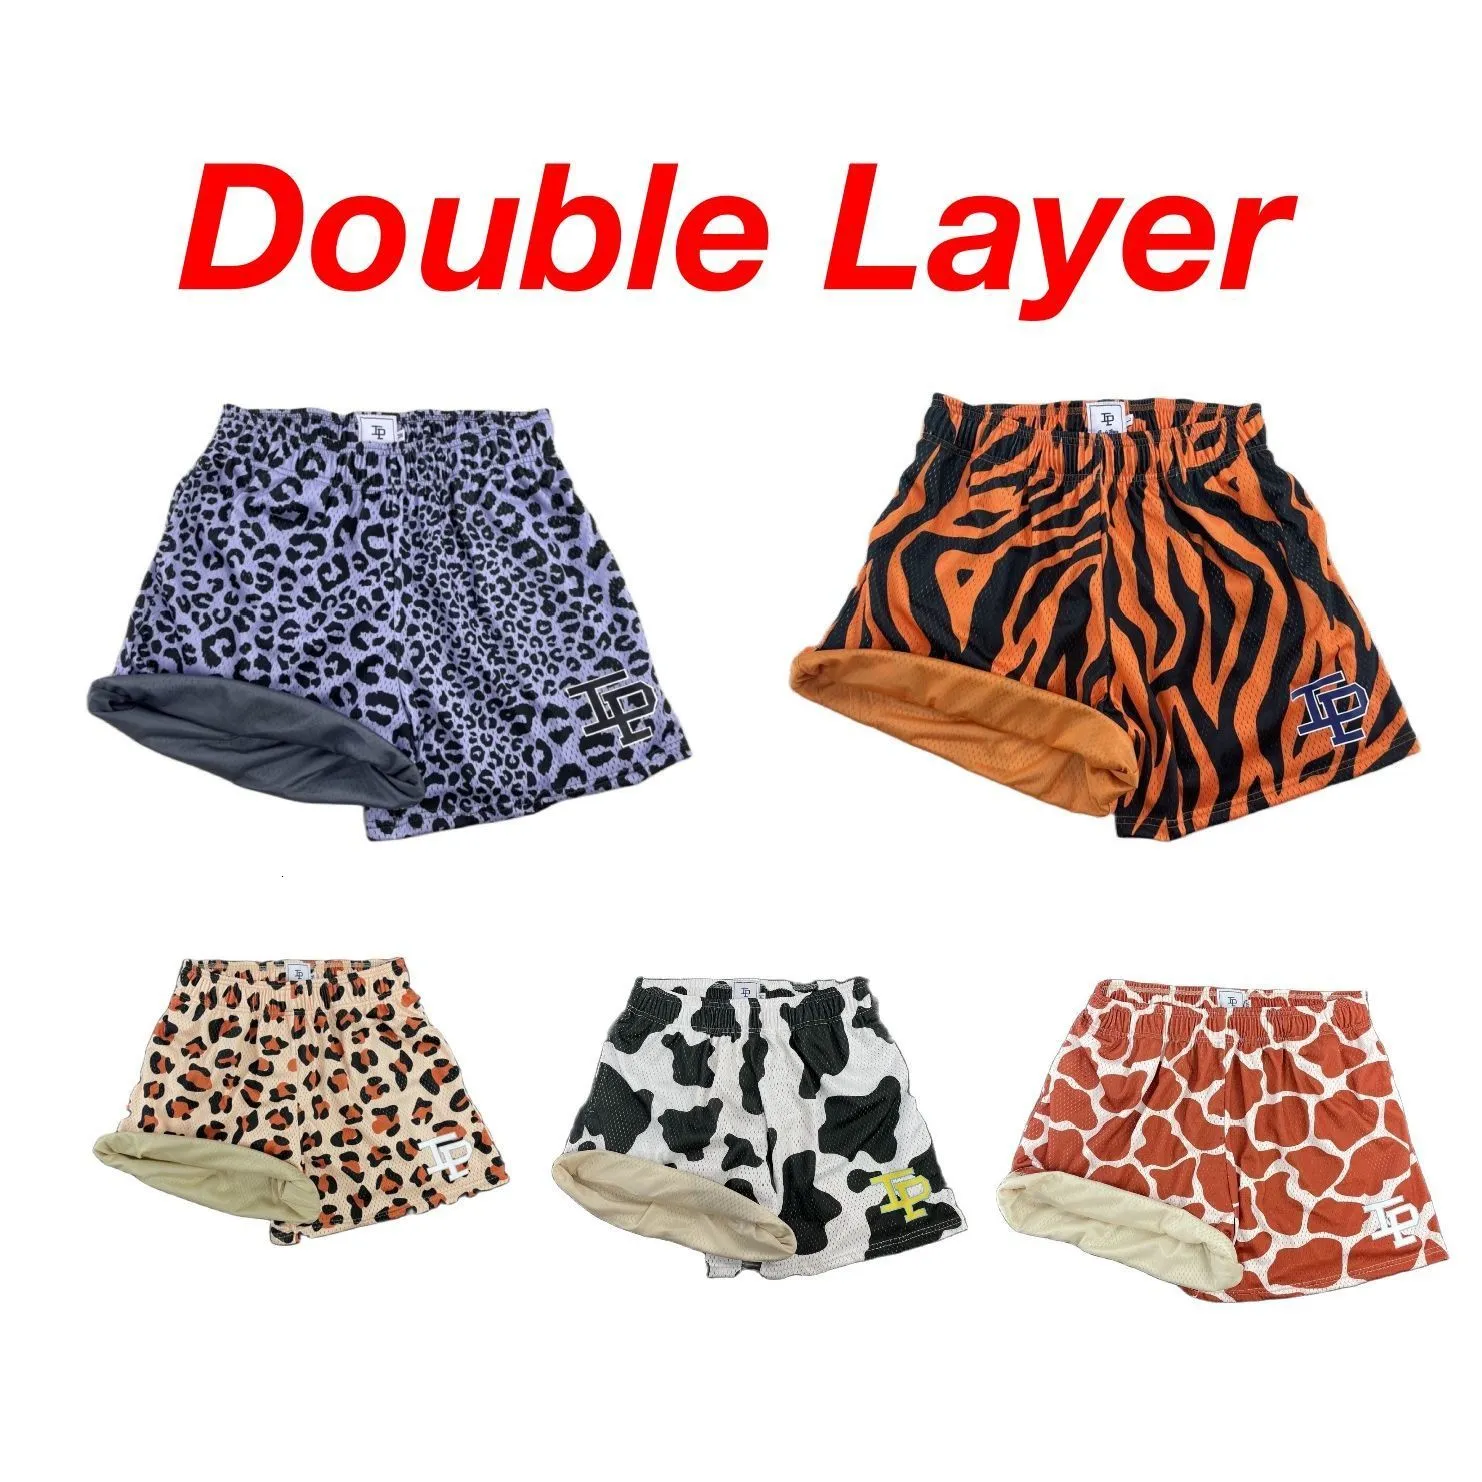 Men's Shorts Inaka Double Mesh Shorts 2 in 1 Deck Men Women Classic GYM Mesh Shorts Inaka Shorts Animal Print With Liner 230328